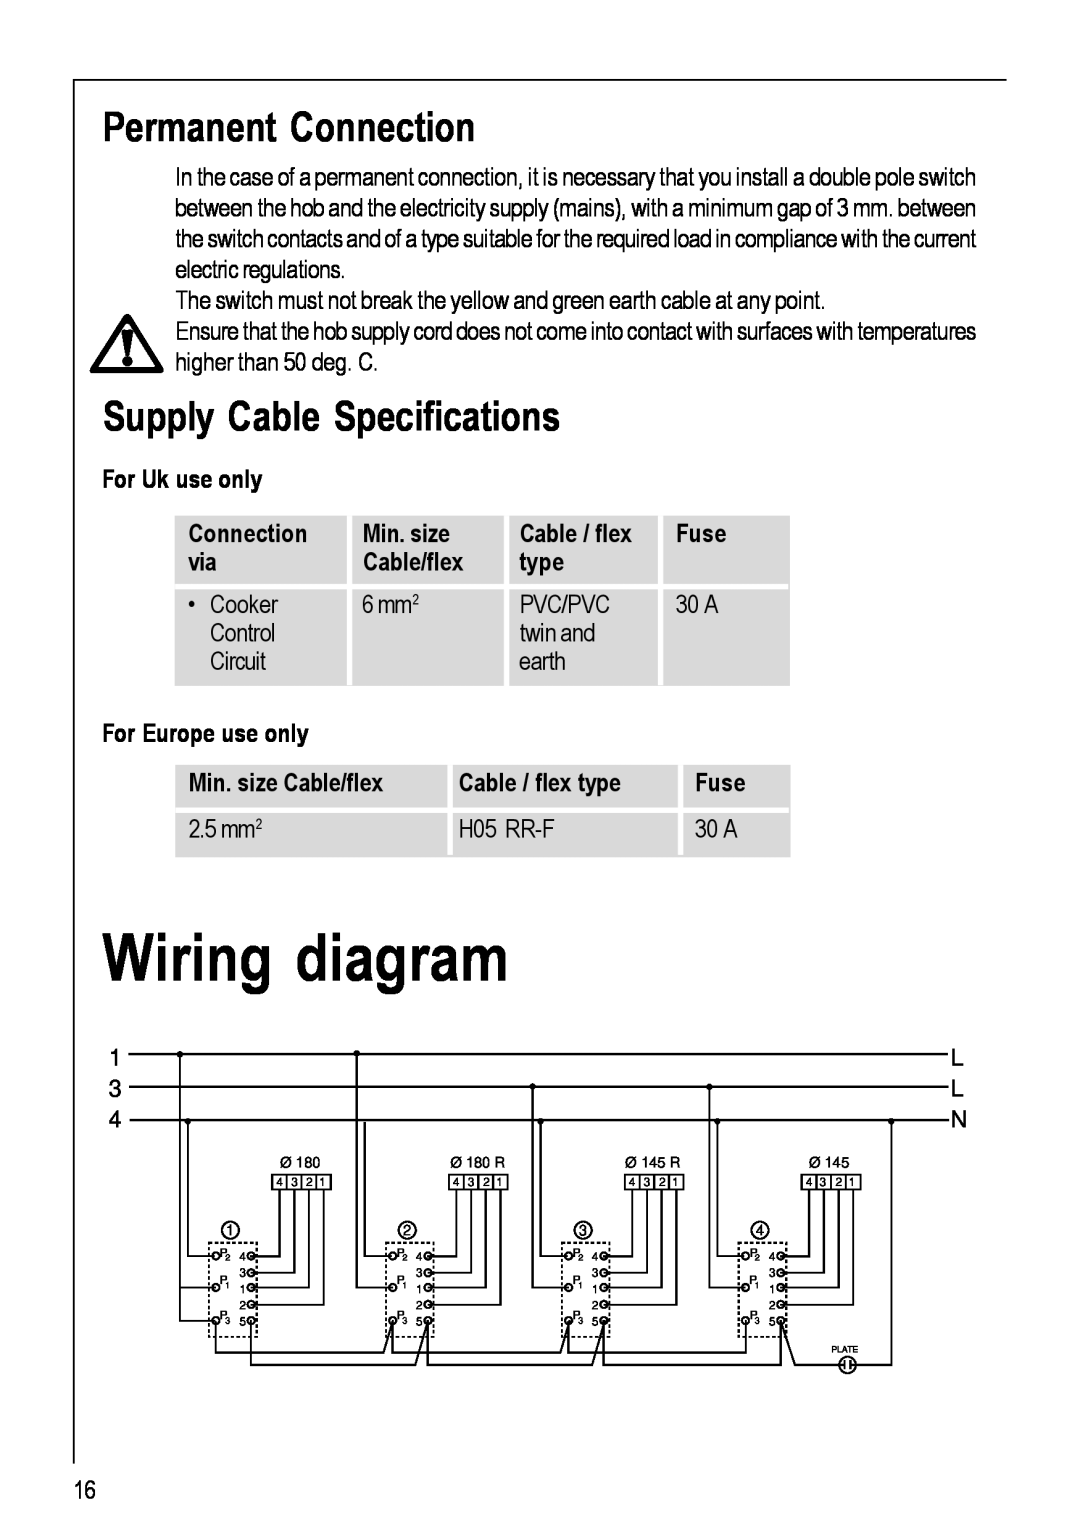 Electrolux 111 K operating instructions Wiring diagram, Permanent Connection, Supply Cable Specifications 